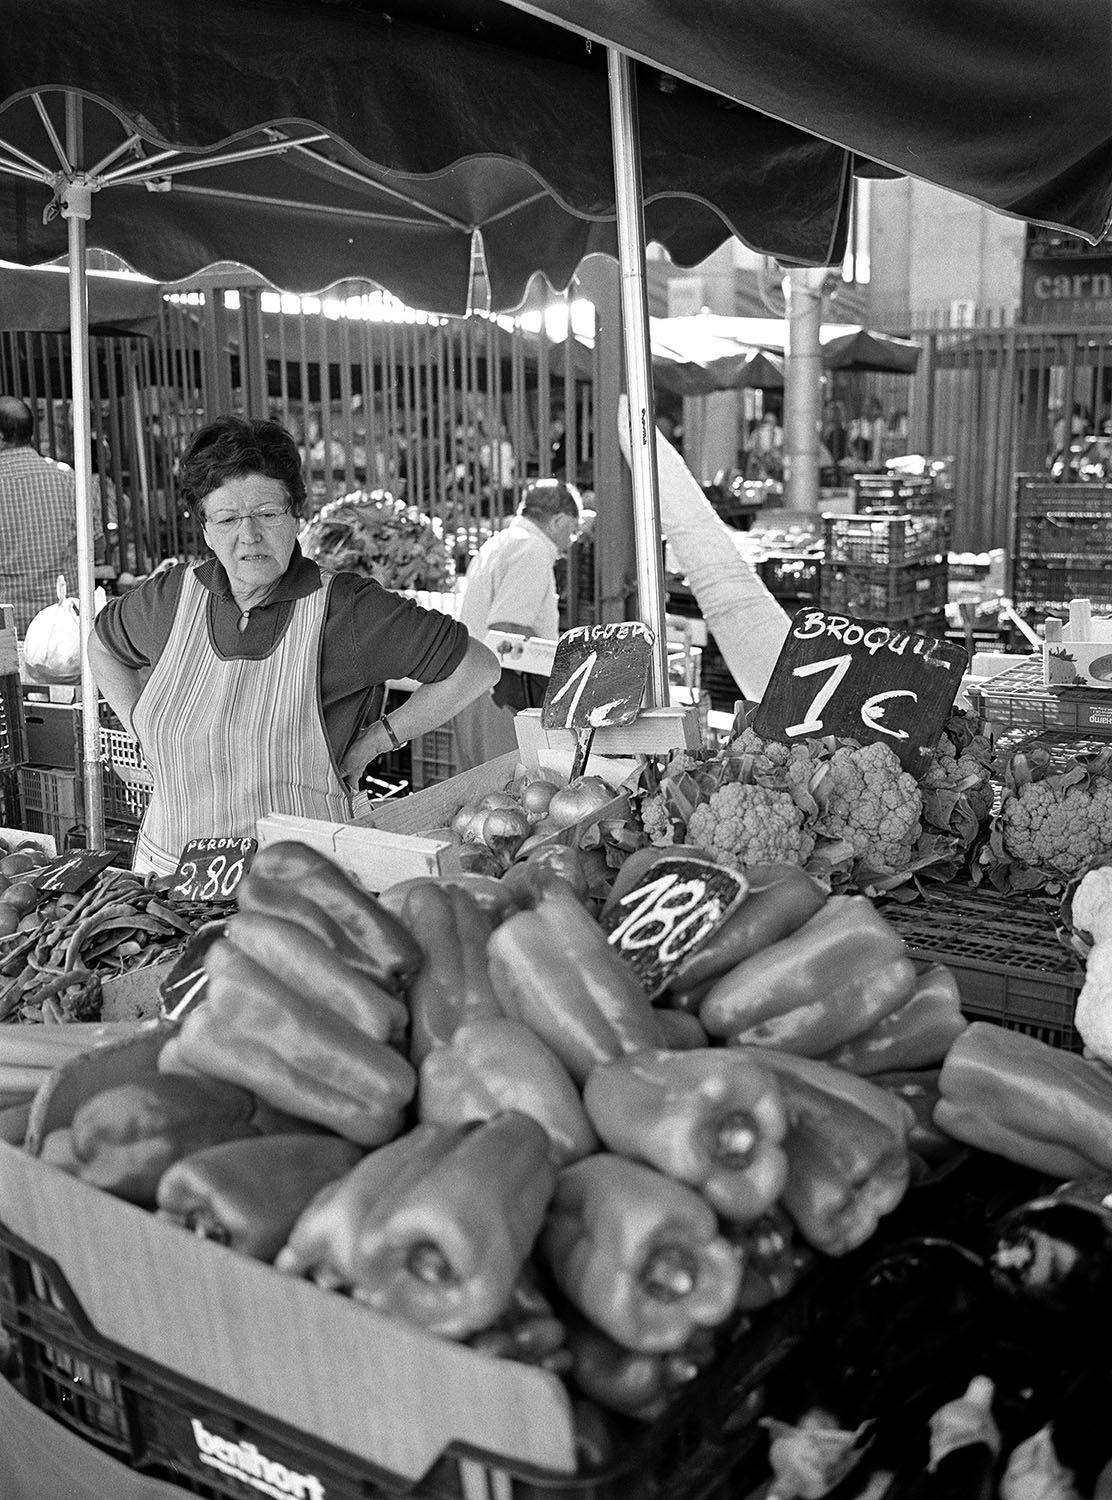 Lady at fruit and veg stall outside La Bocaracá. Barcelona spain - ILFORD HP5 black and white film by Keith Moss